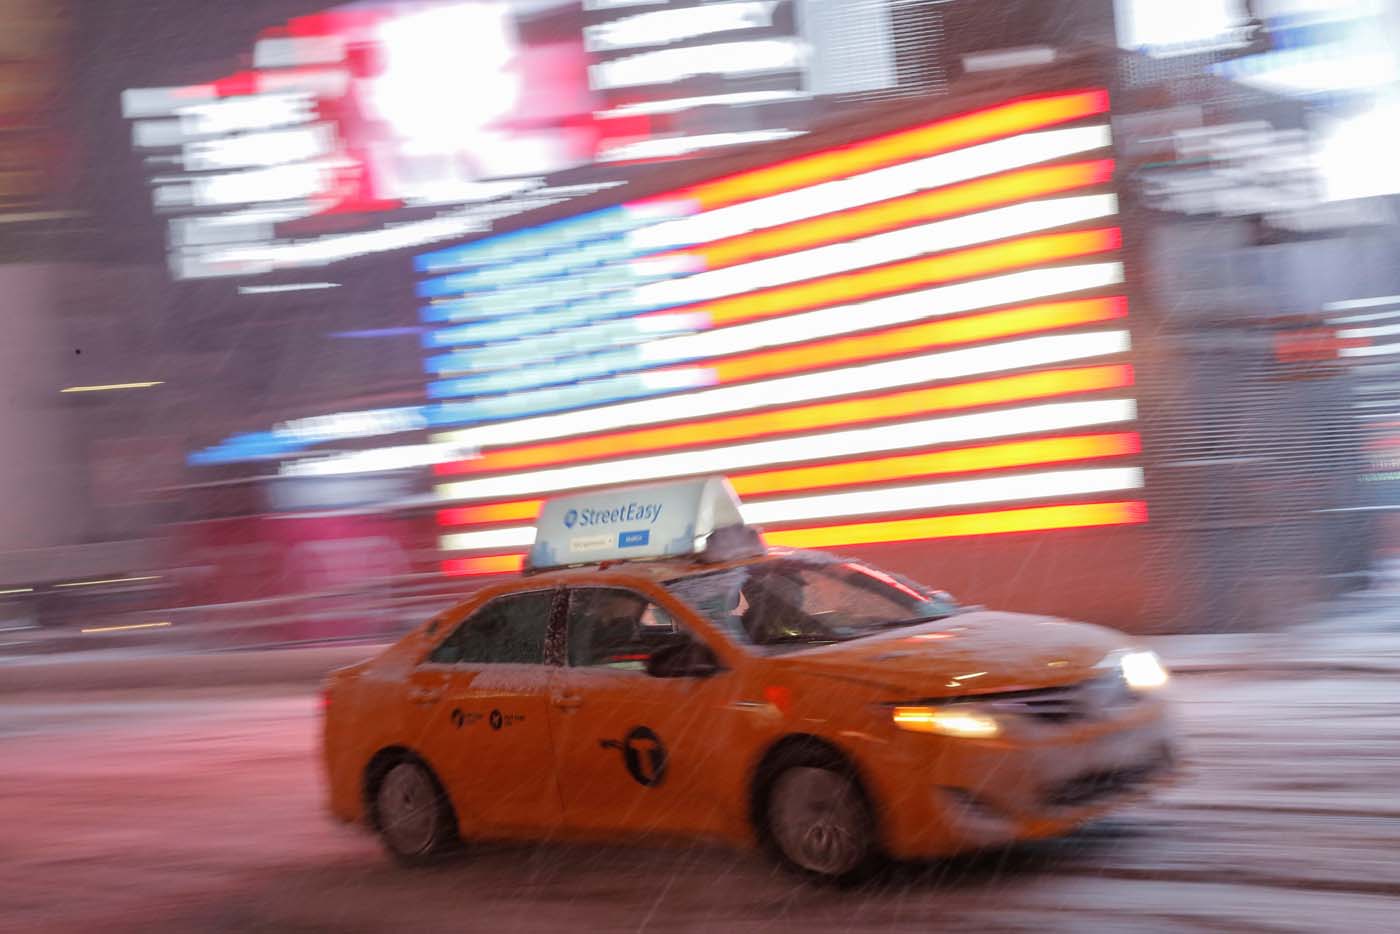 A taxi cab drives through Times Square as snow falls in Manhattan, New York, U.S., March 14, 2017. REUTERS/Andrew Kelly